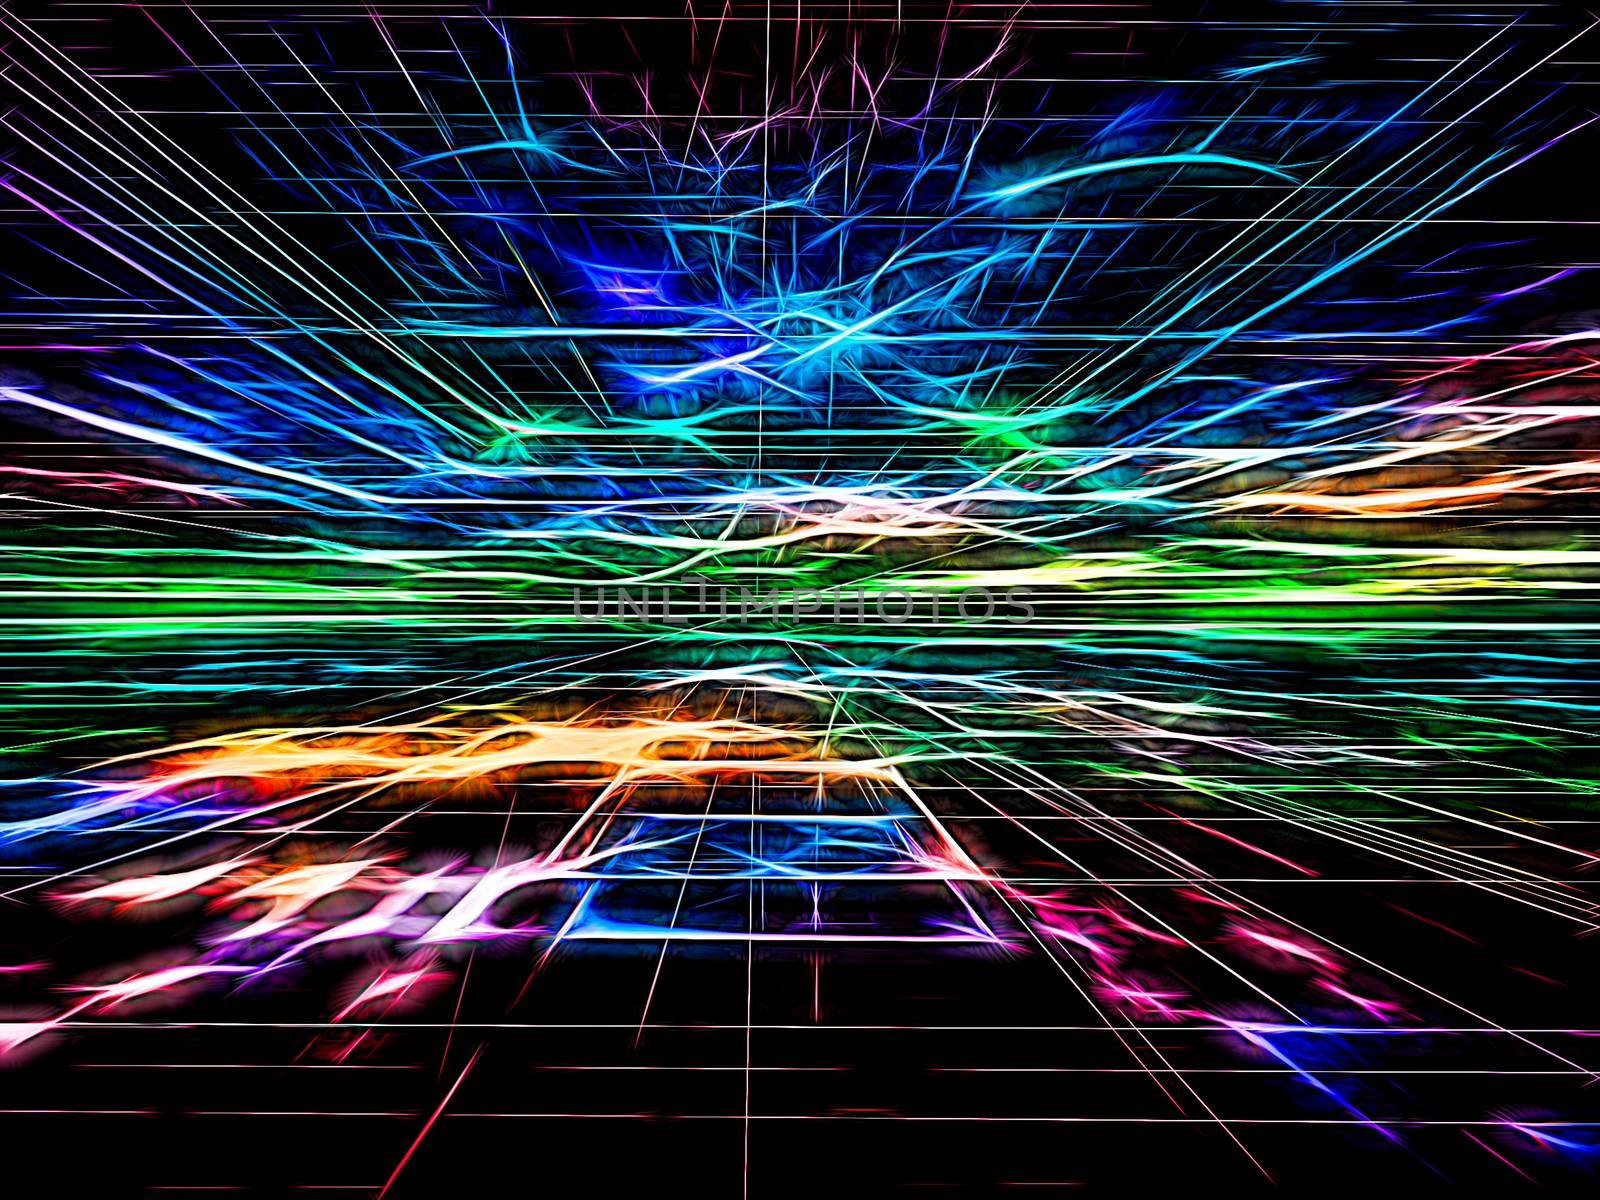 Abstract tech bright background - digitally generated image by olgasalt